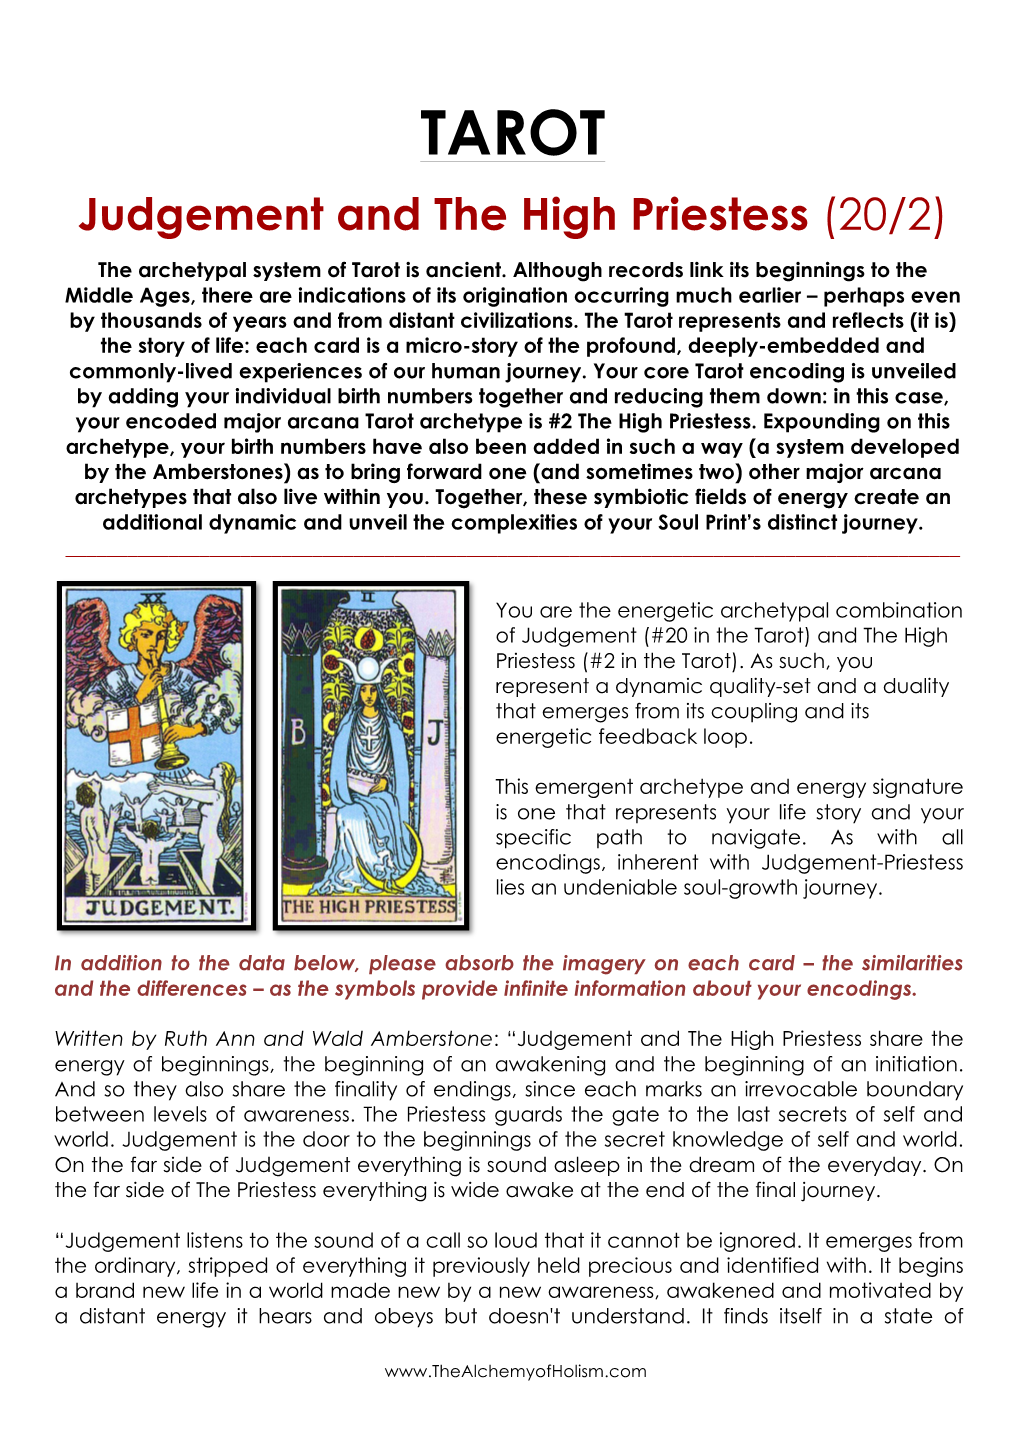 Judgement and the High Priestess (20/2)